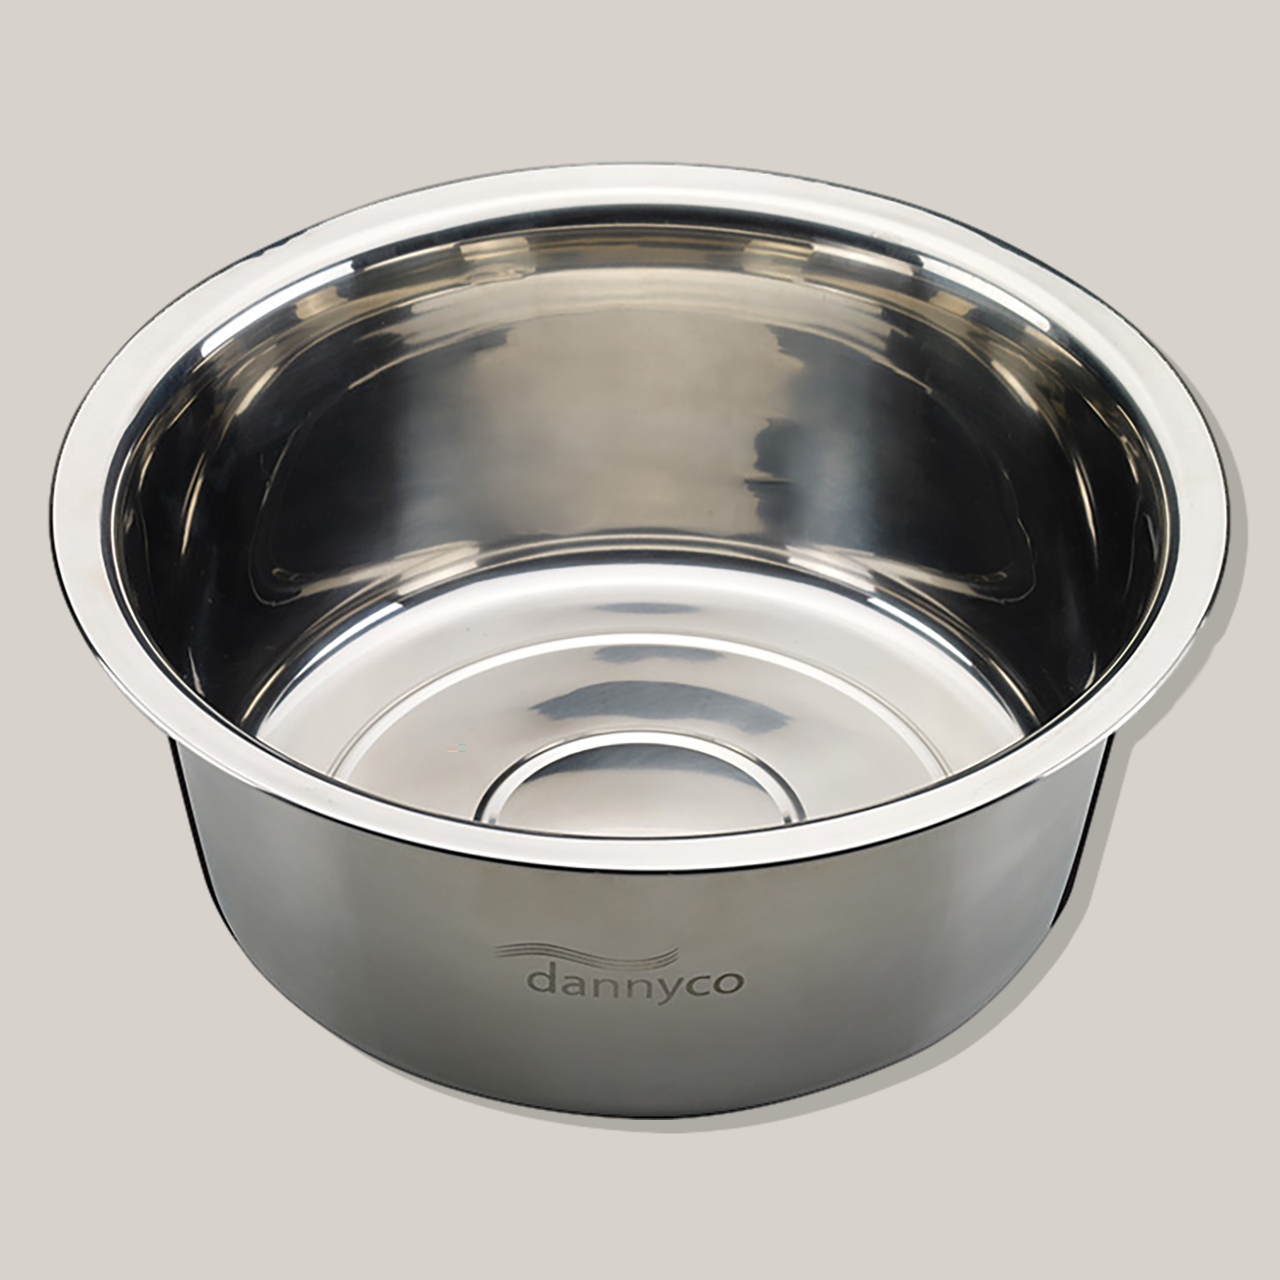 Dannyco Stainless Steel Pedicure Bowl 